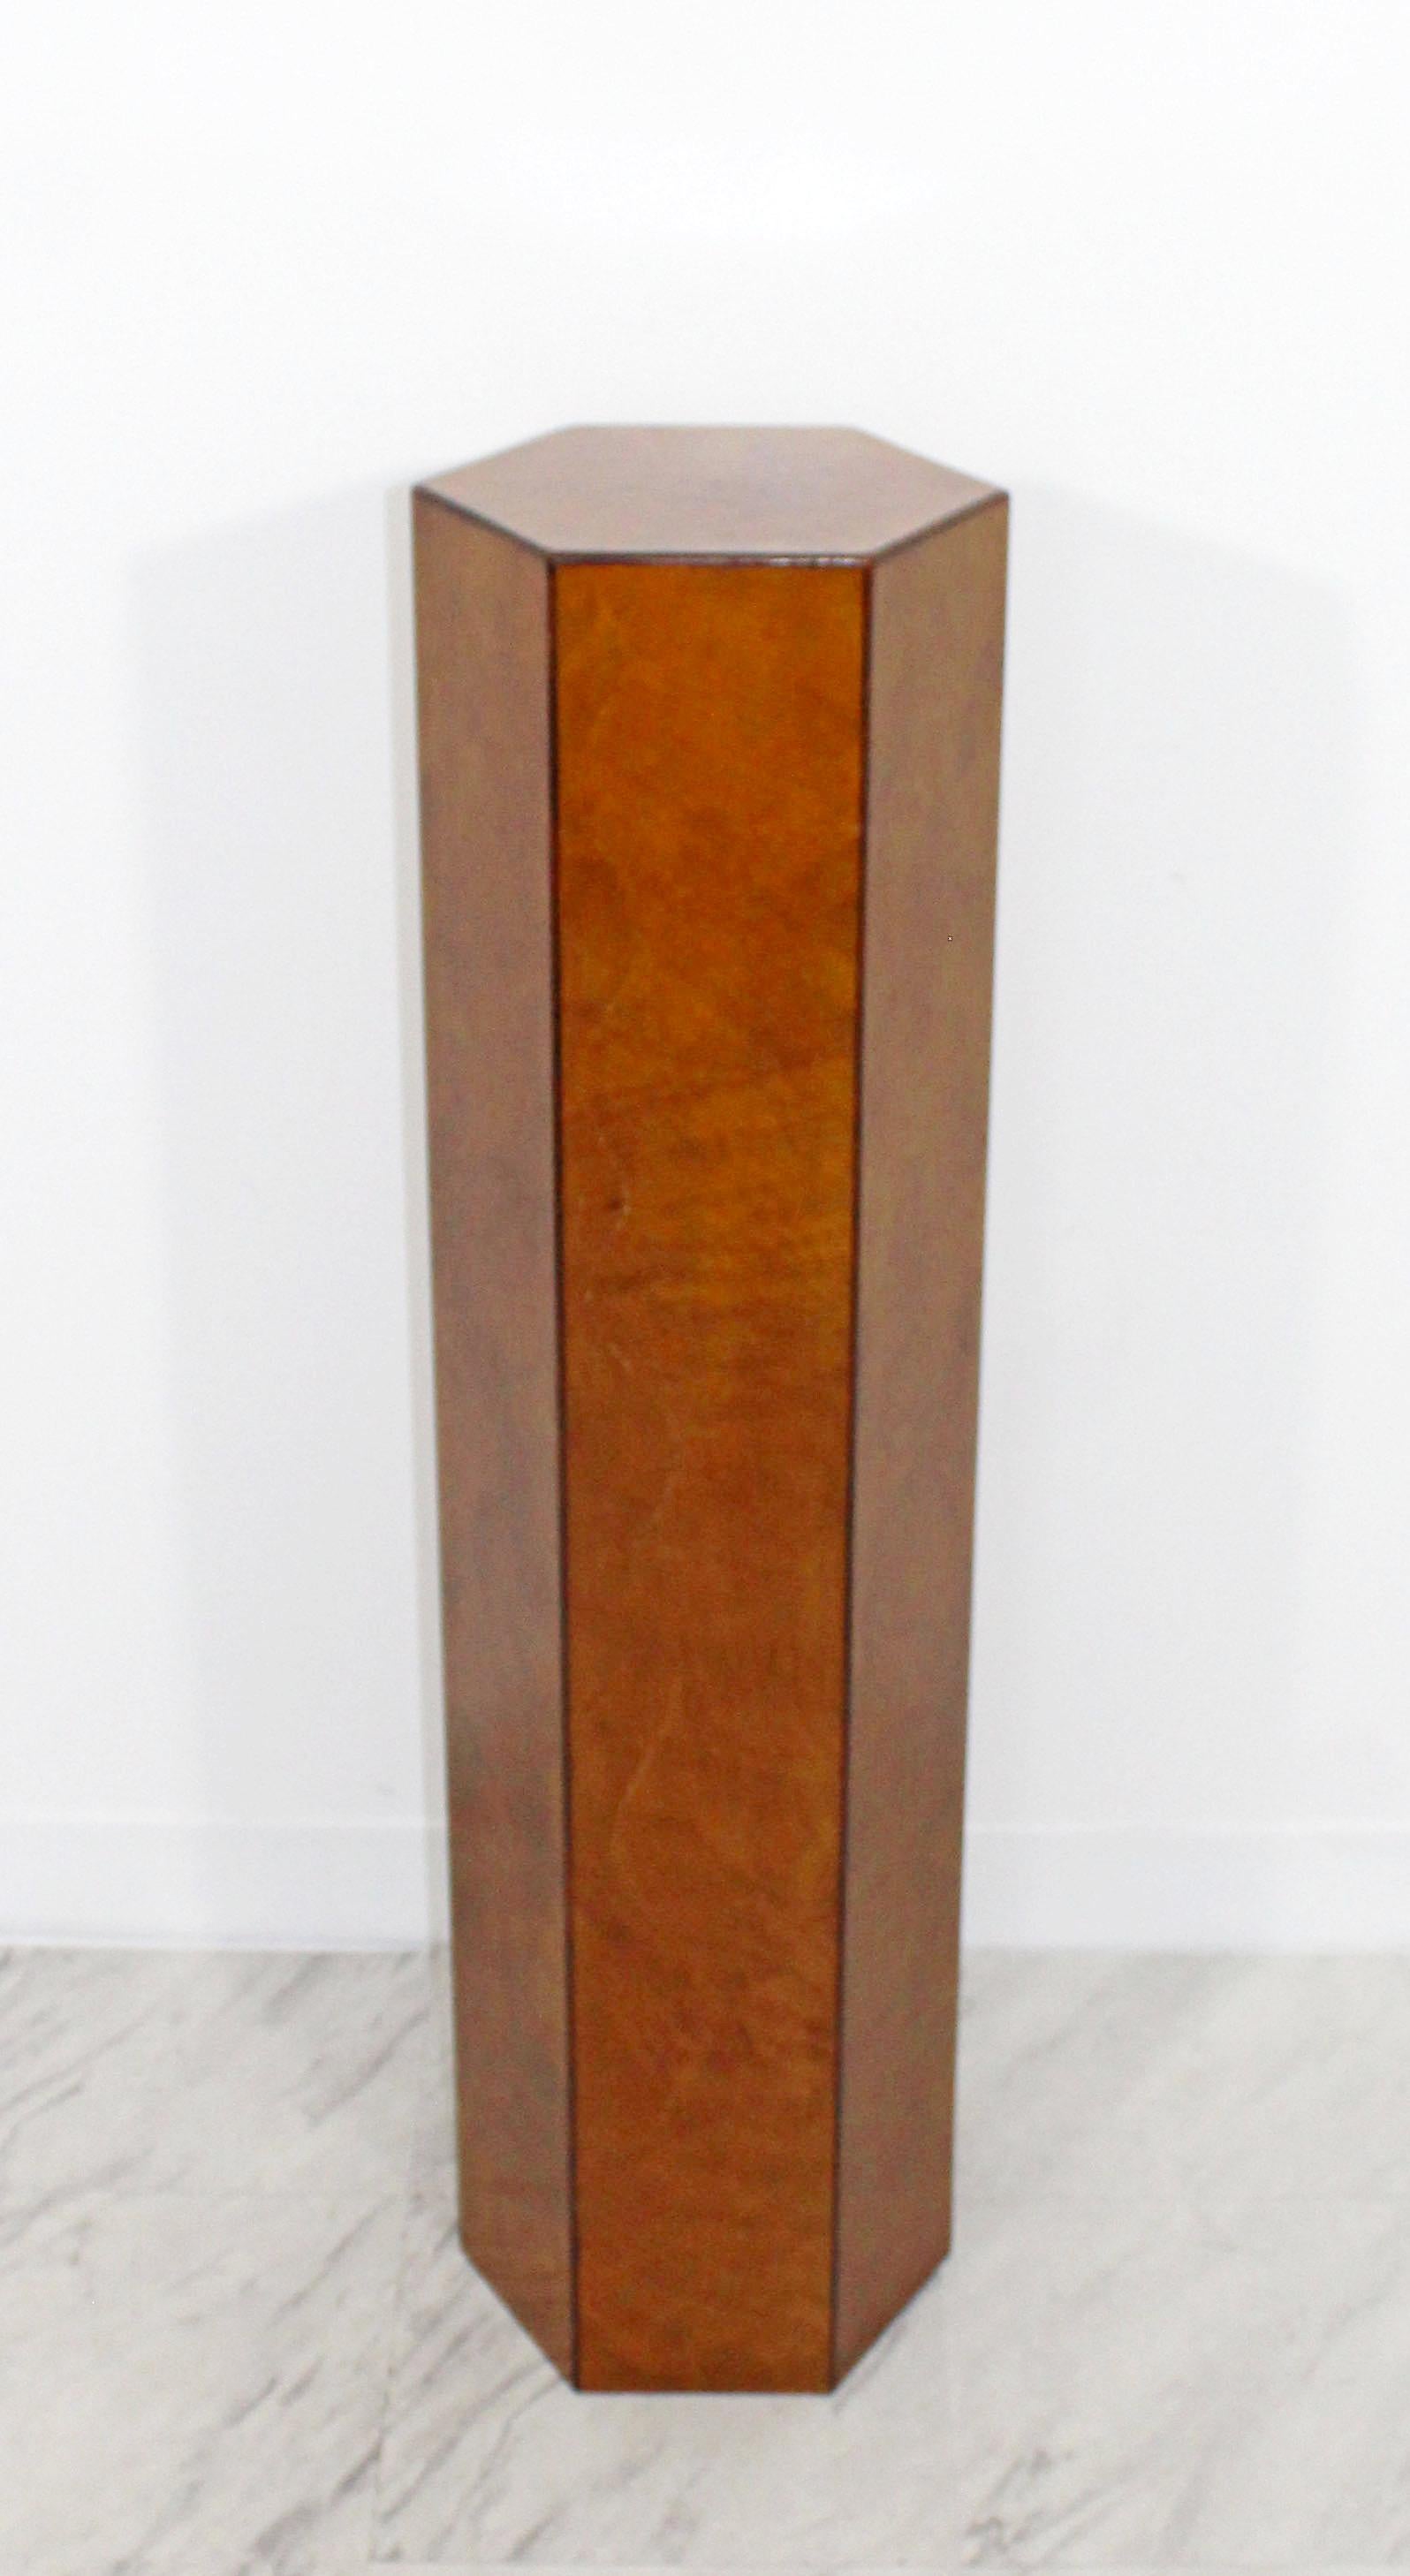 For your consideration is a wonderful, burl and rosewood, hexagonal shaped display pedestal, made in Italy, circa the 1970s. In very good condition. The dimensions are 11